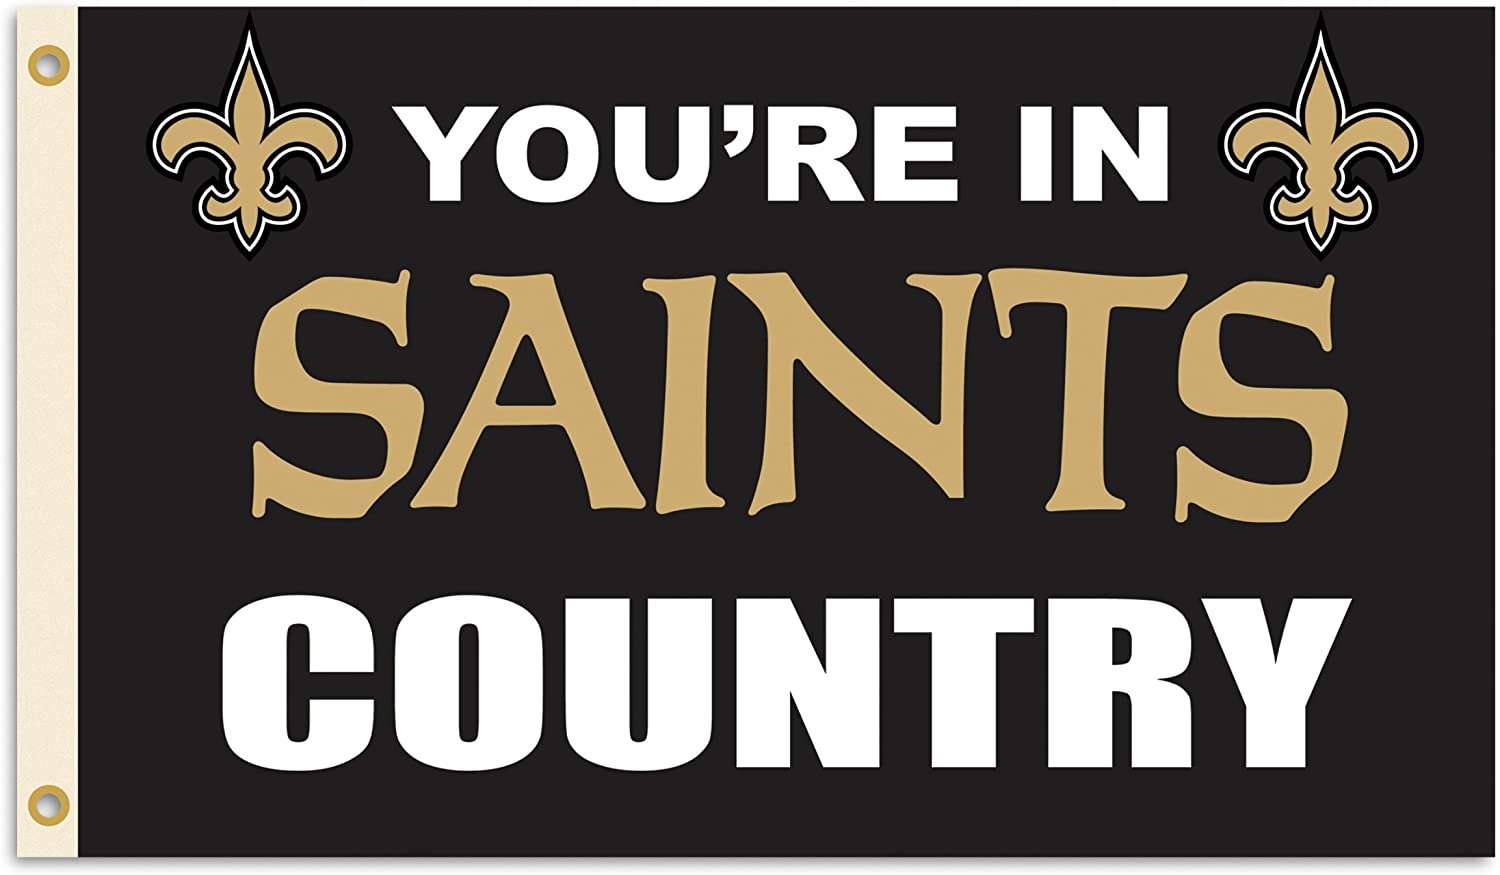 New Orleans Saints 3x5 Foot Flag Banner, Metal Grommets. Outdoor, Single Sided, In Country Design